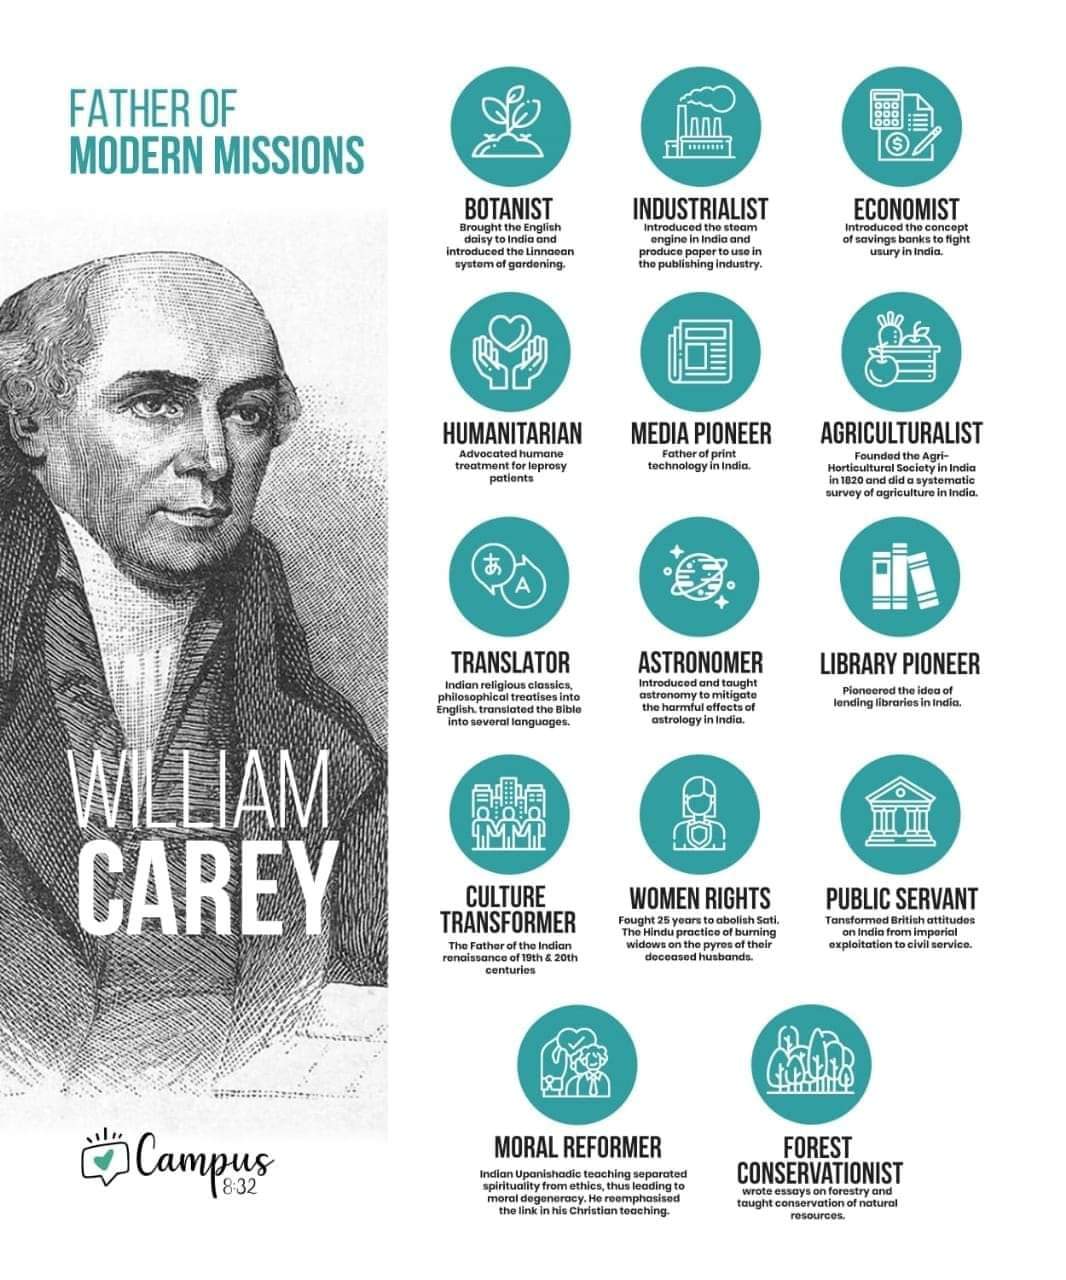 William - father of modern missionaries